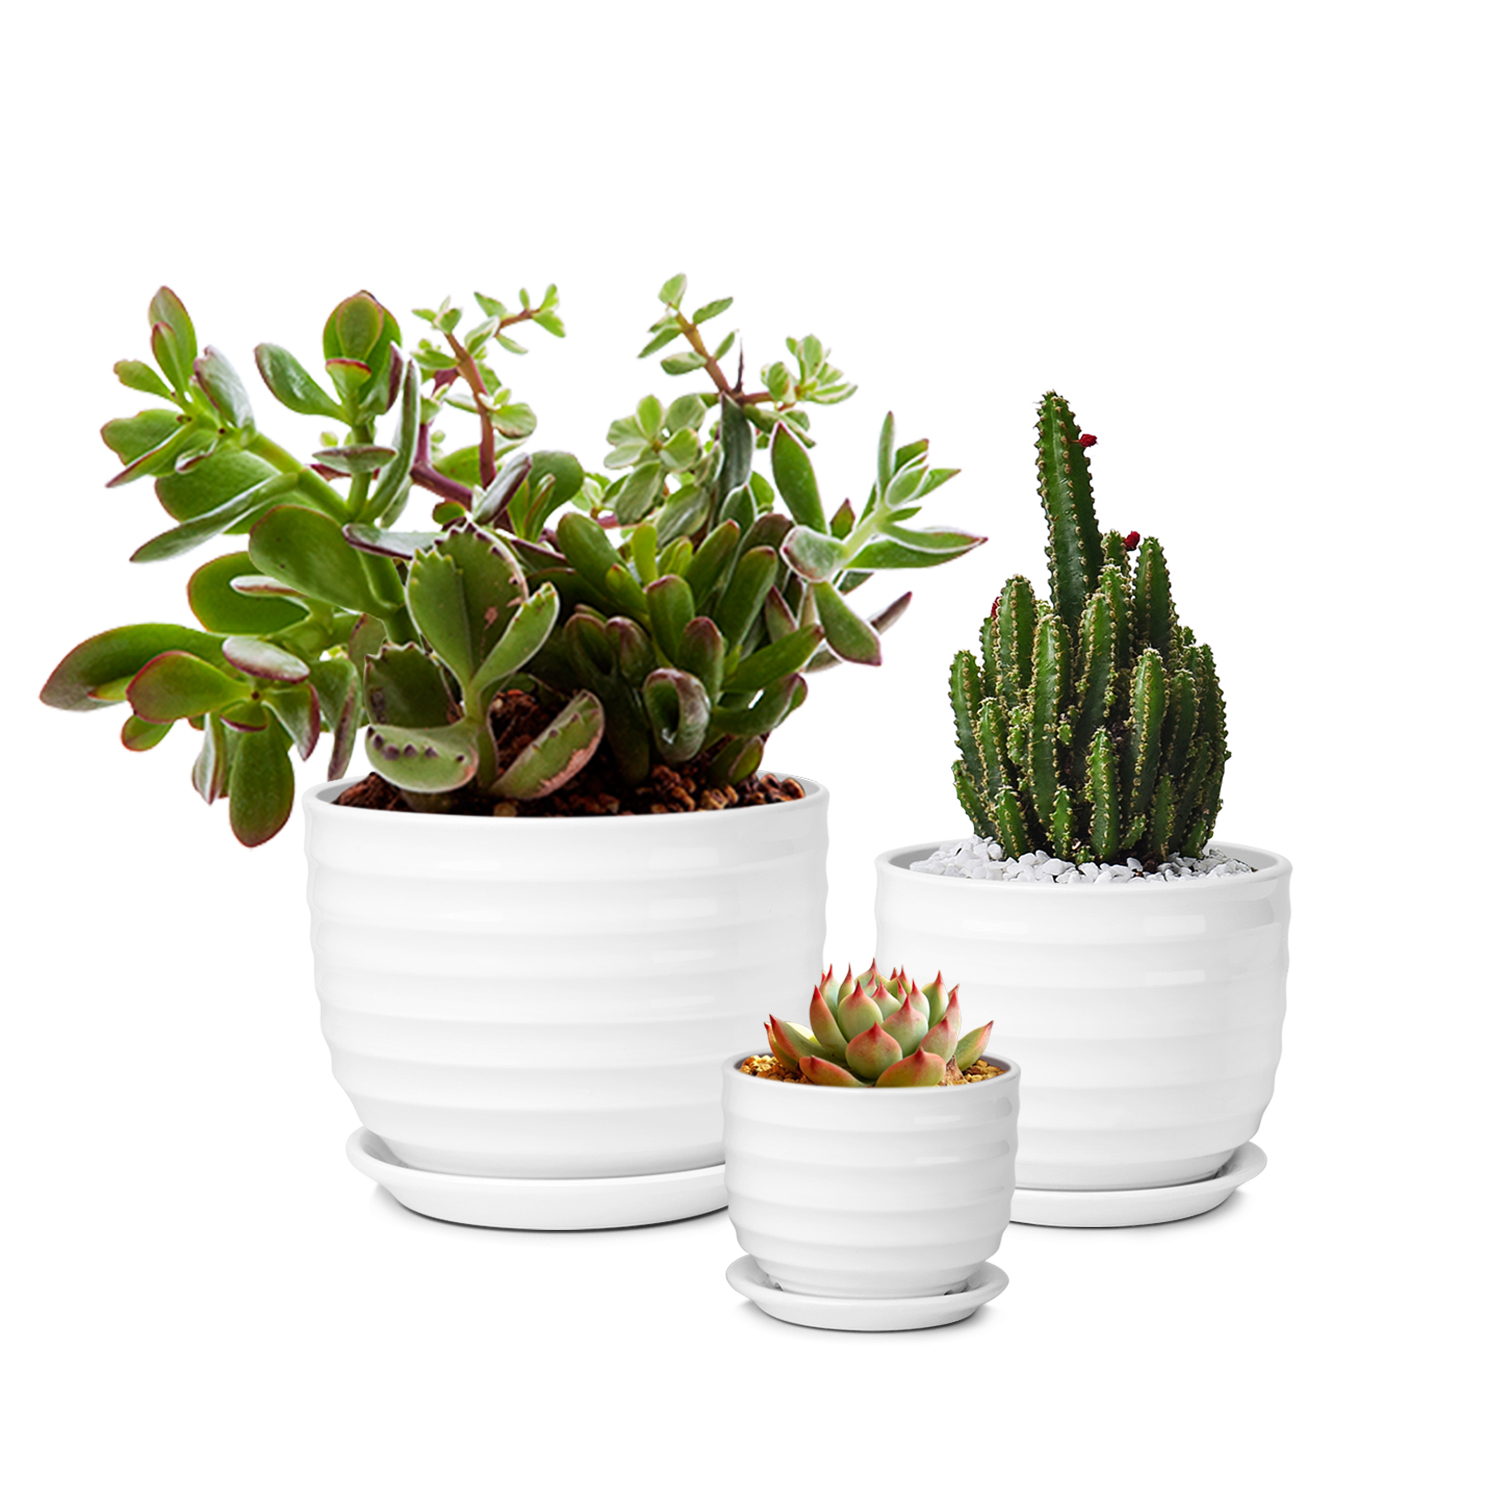 Succulent Plants Pots, Flower Planters - Modern Ribbed Ceramic Round Container Set of 3, 3/5/7 Inch White for Cactus African Violet Foliage Mint Basil Herb Windowsill Garden Indoor Outdoor Office Home - image 2 of 9